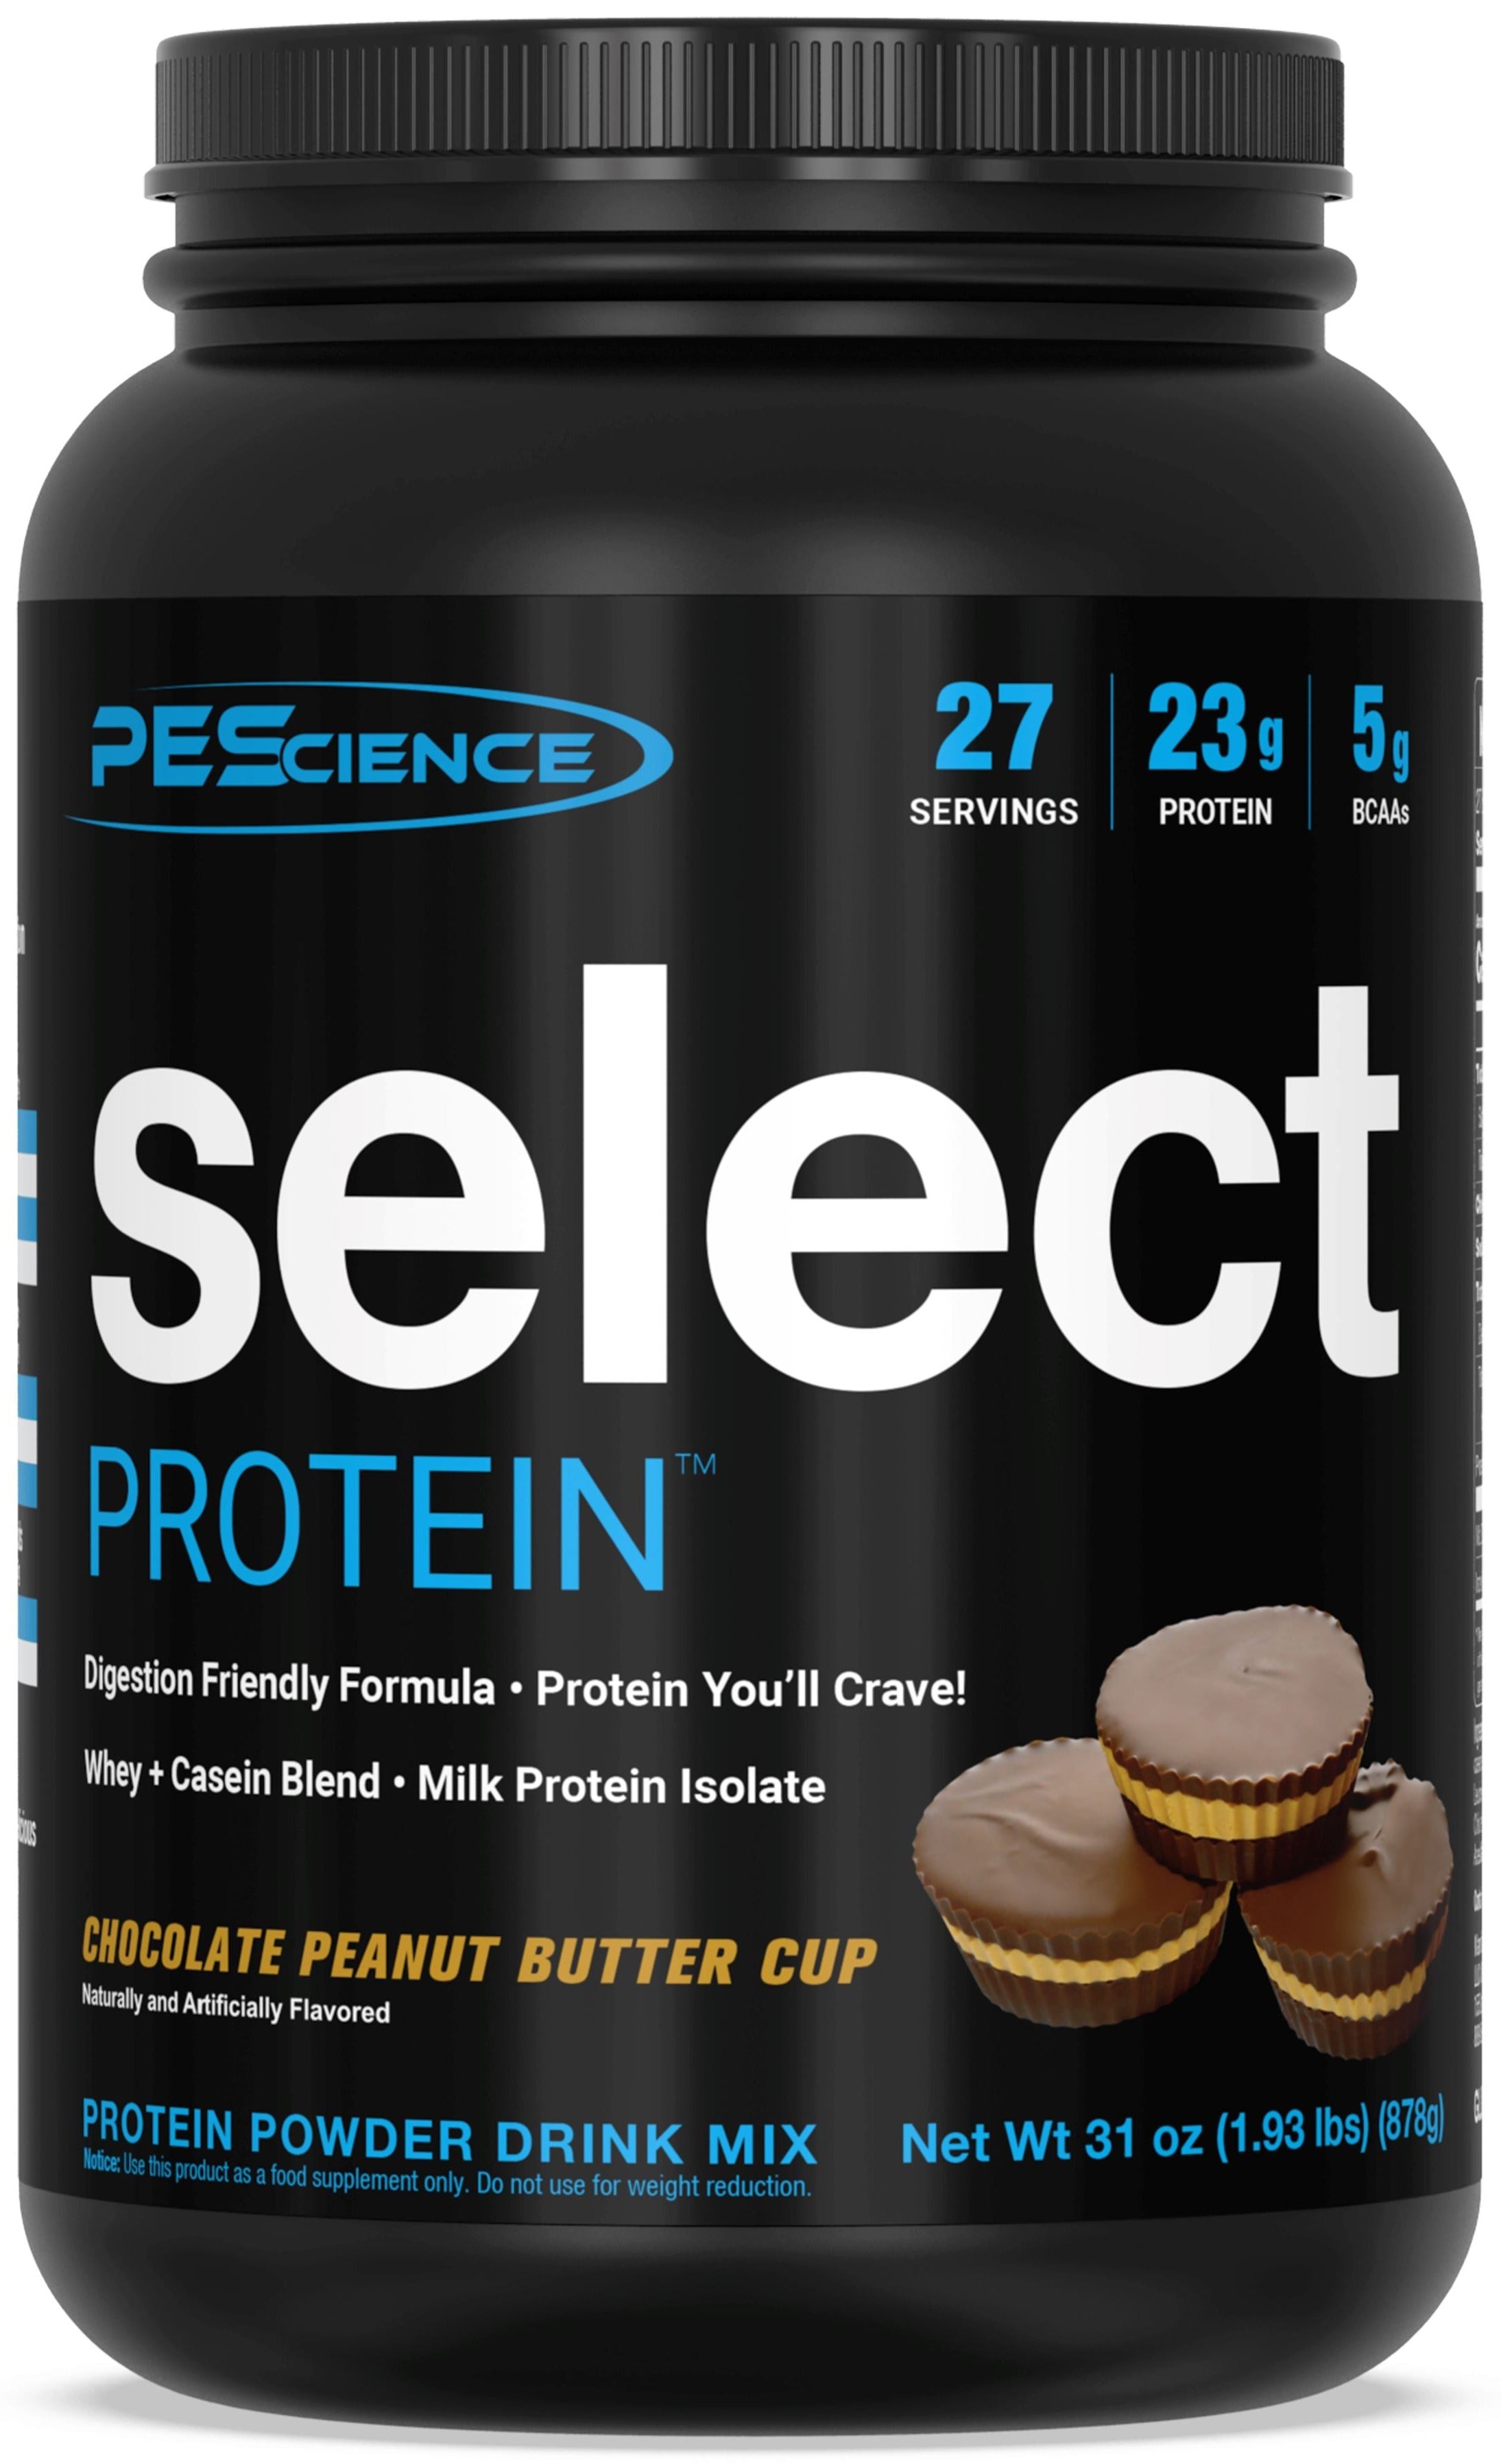 Select Protein | Whey + Casein Blend | Protein You'll Crave – PEScience